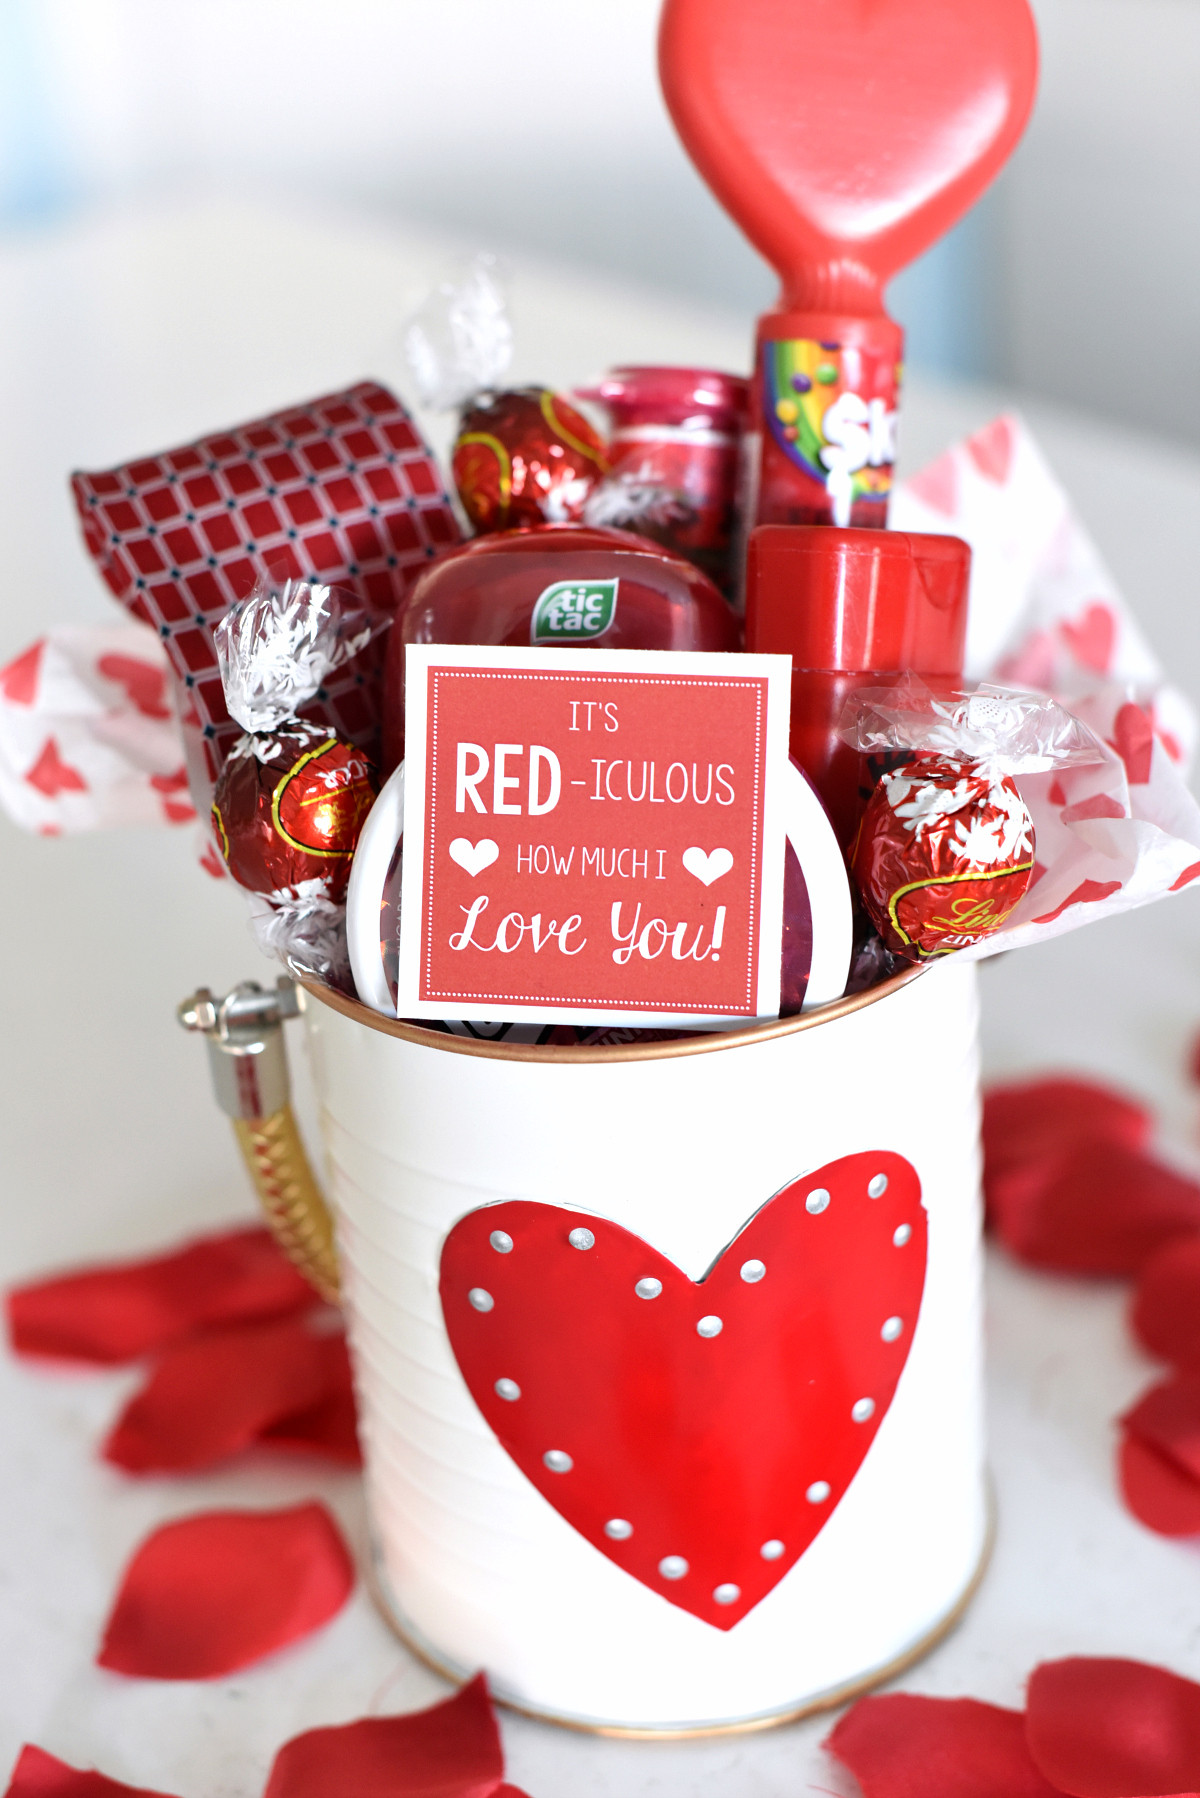 Gift Ideas For Valentines For Husband
 Cute Valentine s Day Gift Idea RED iculous Basket